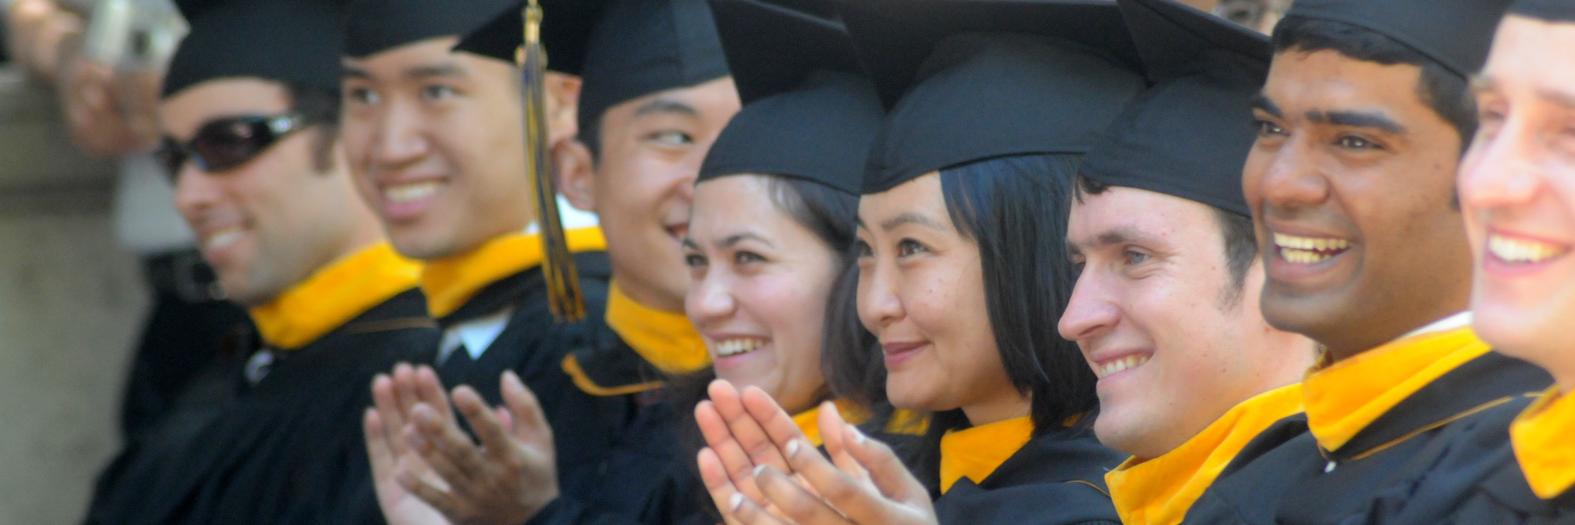 A group of graduating master's students at their commencement ceremony, wearing black caps and gowns with gold master's hoods.